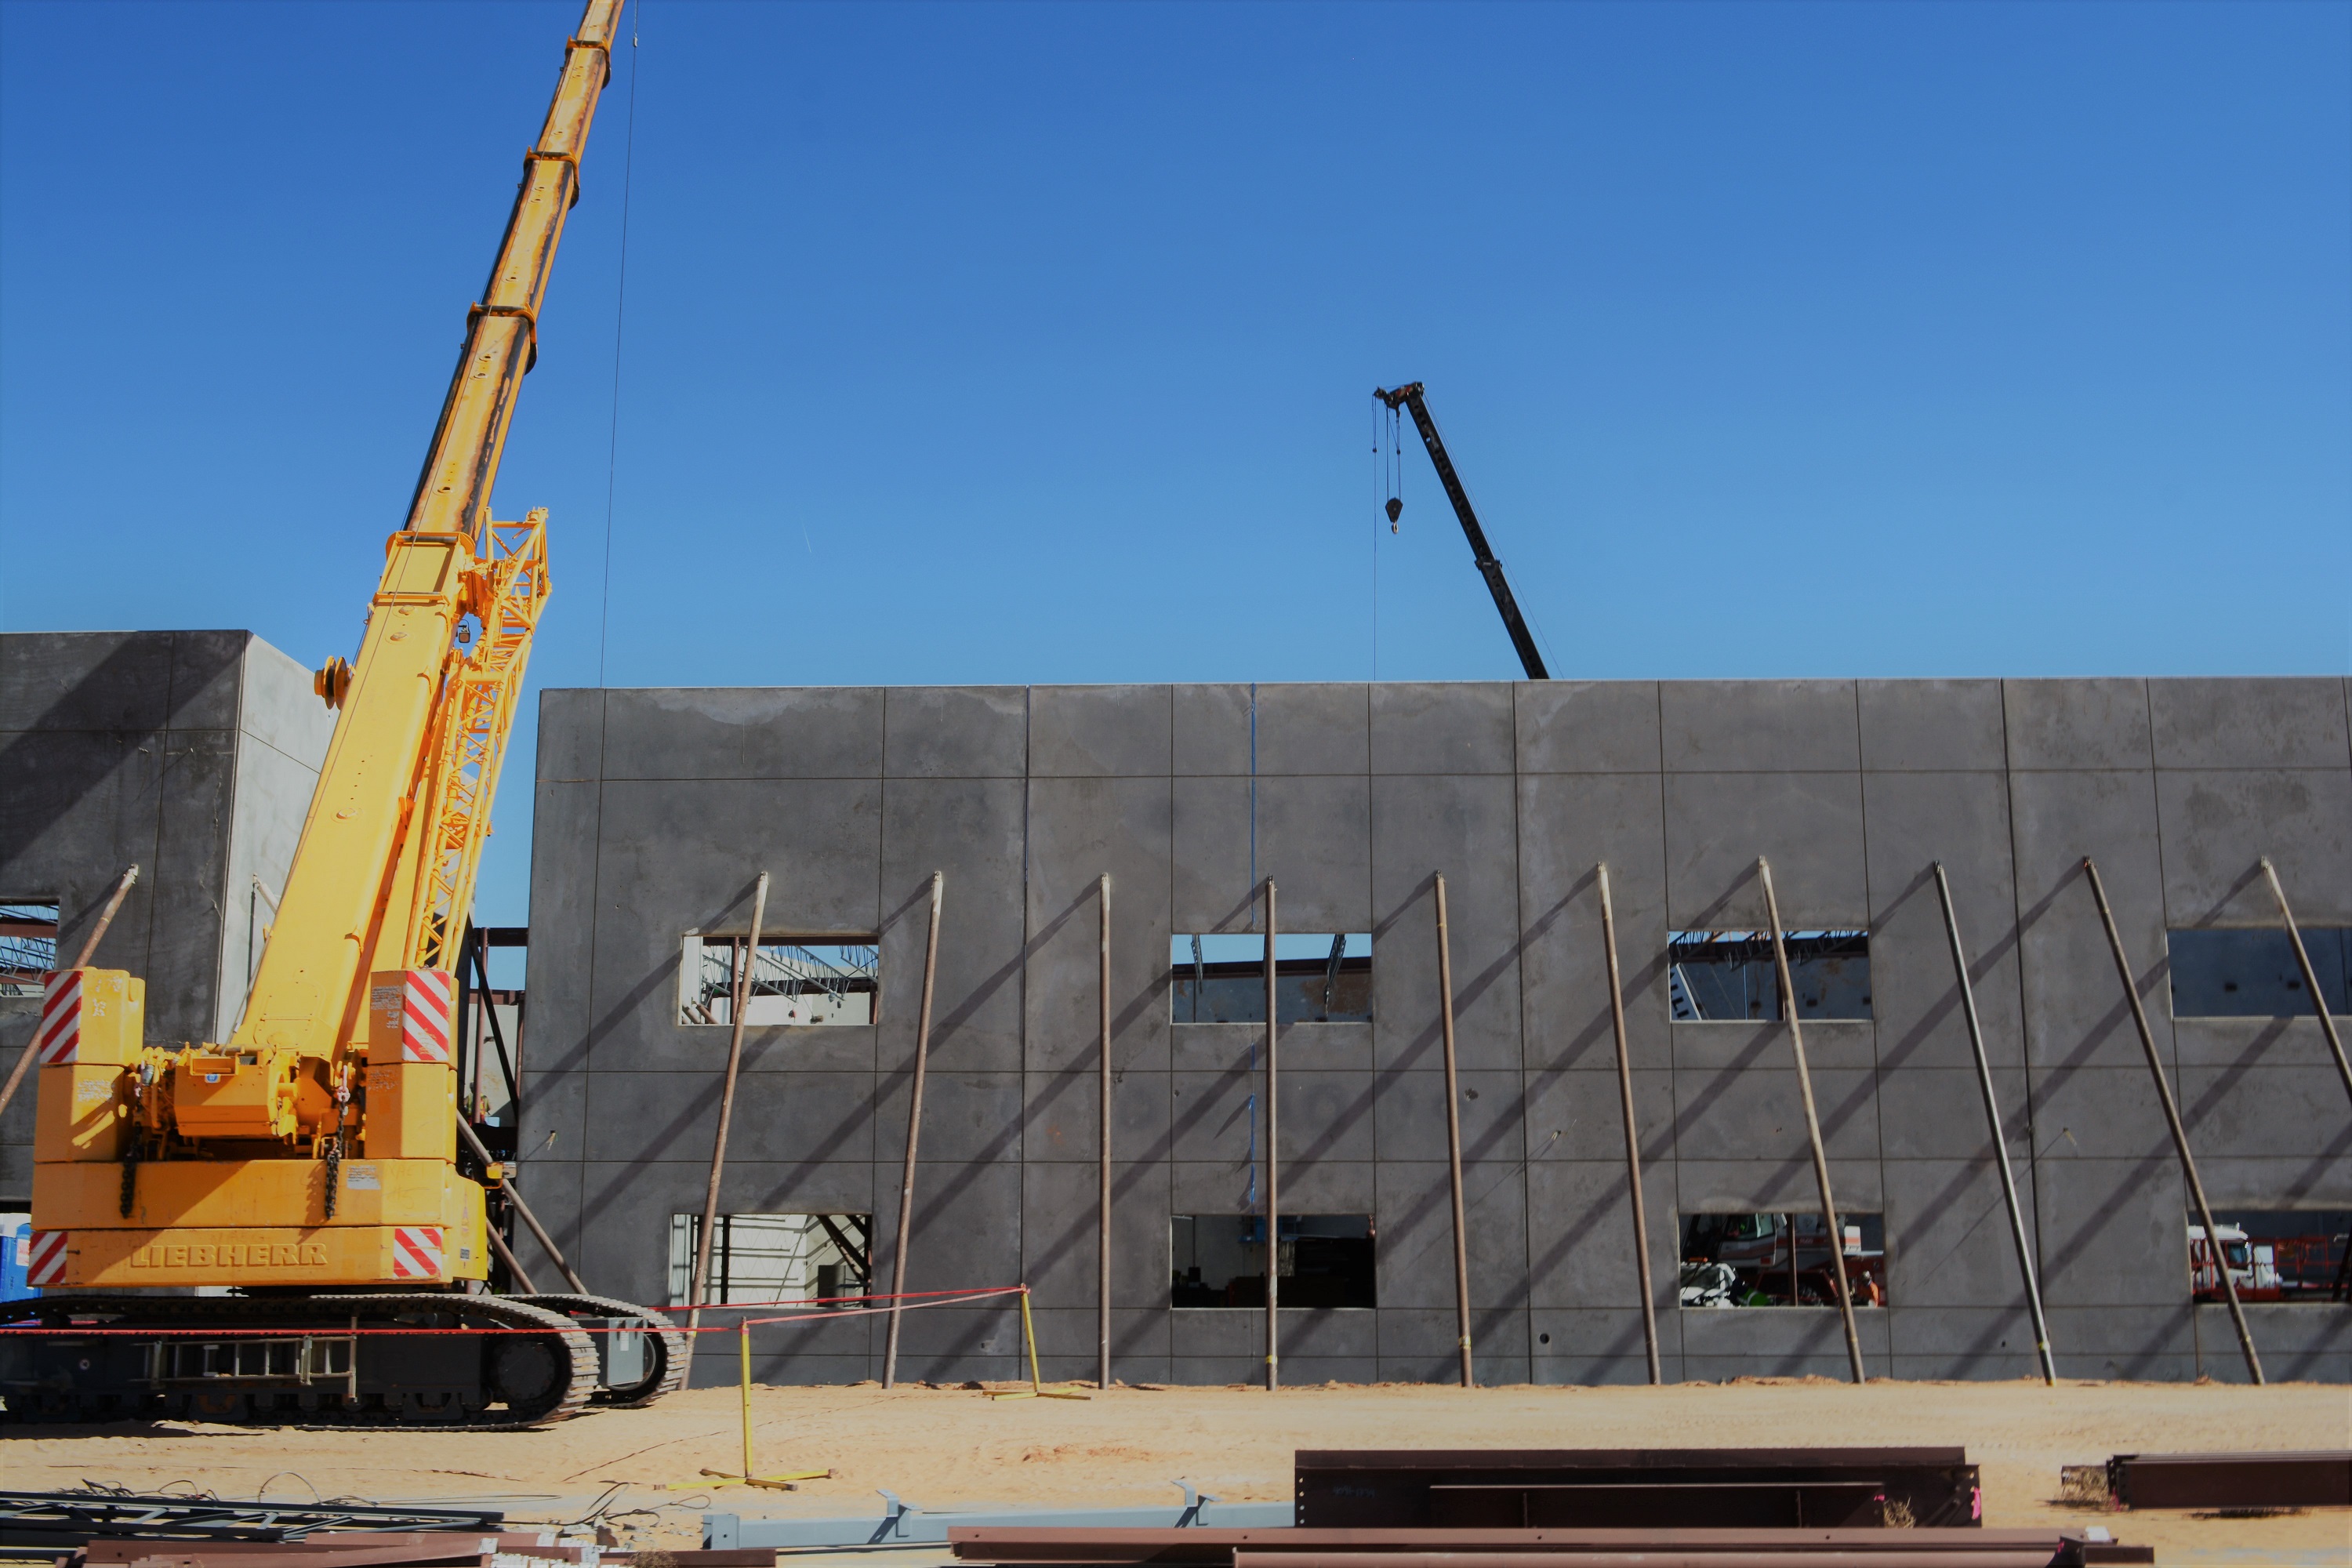 We specialize in tilt up erectors for projects, here’s a look at our Two-Story Tilt Up Project at Pebble Hills Elementary School in El Paso, Texas